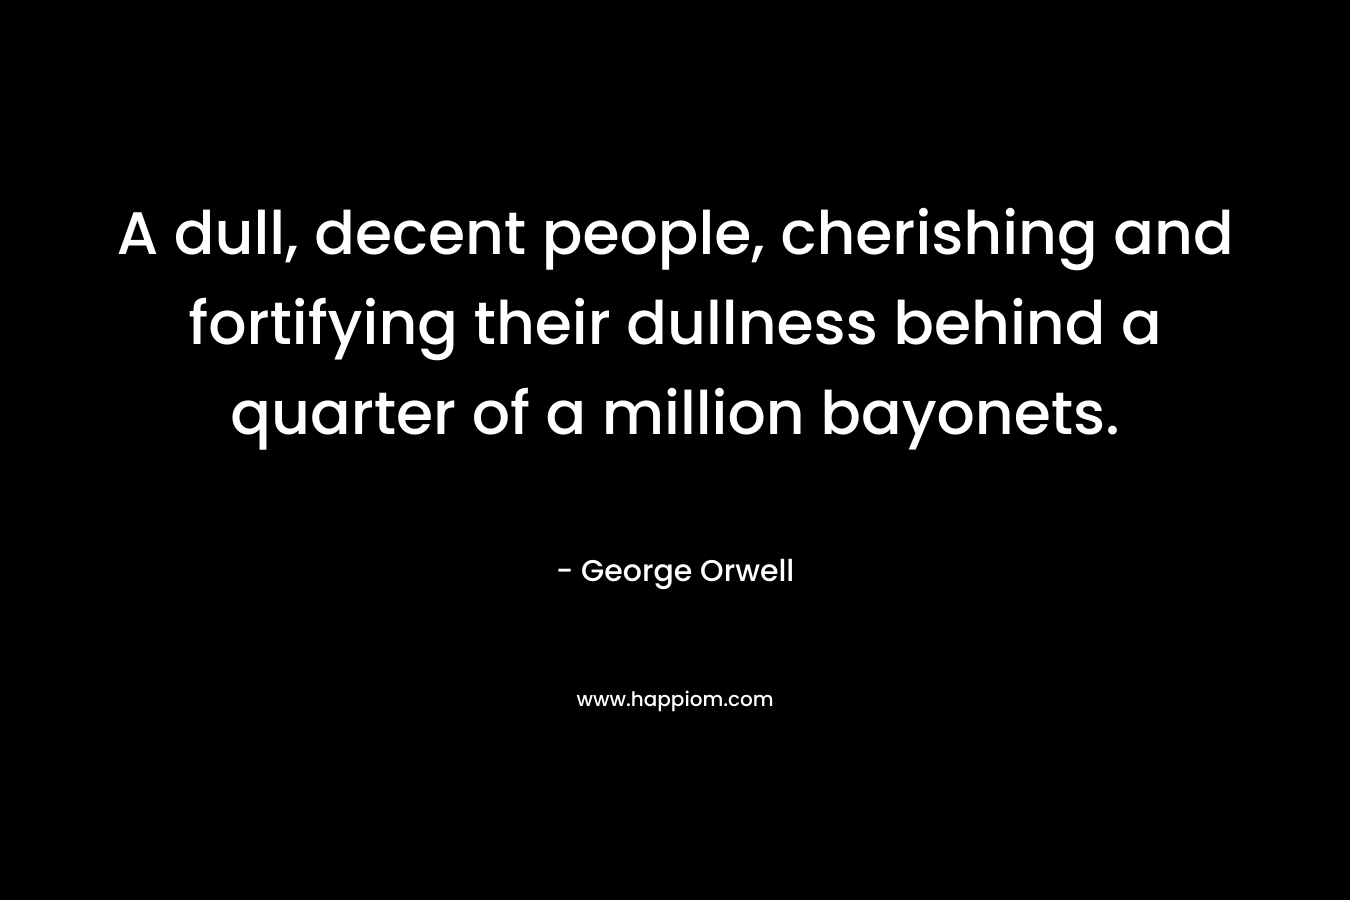 A dull, decent people, cherishing and fortifying their dullness behind a quarter of a million bayonets.